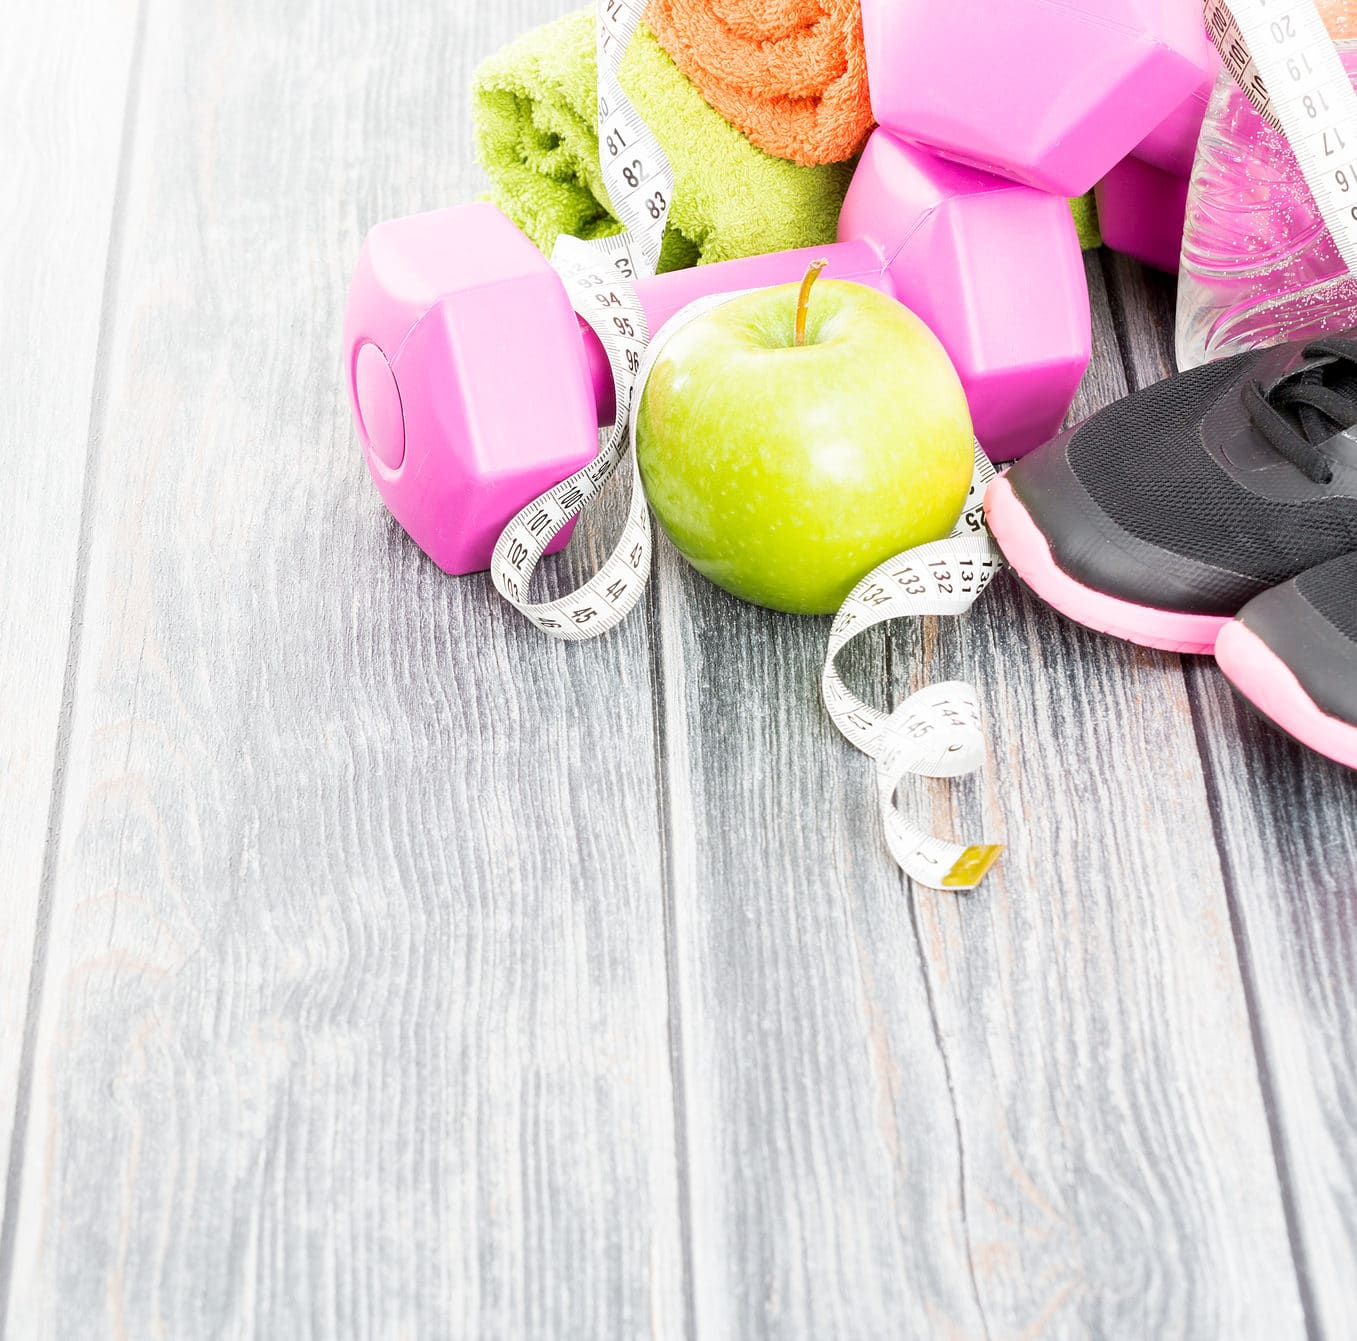 How I Learned to Love Exercise (as a mom)